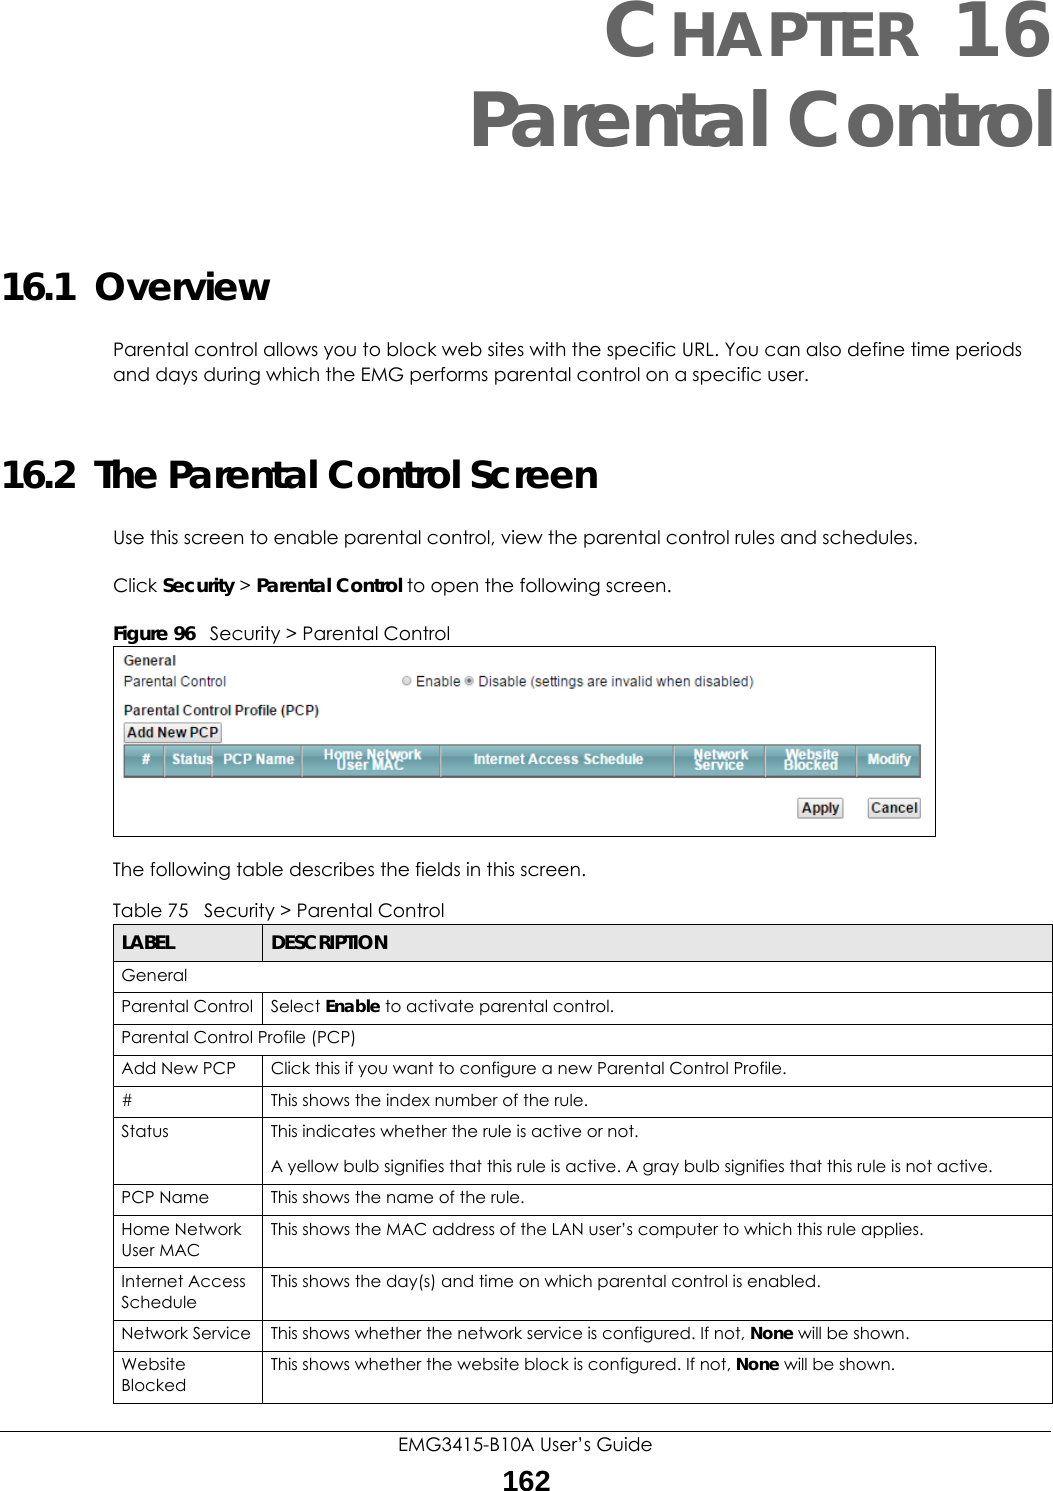 EMG3415-B10A User’s Guide162CHAPTER 16Parental Control16.1  OverviewParental control allows you to block web sites with the specific URL. You can also define time periods and days during which the EMG performs parental control on a specific user. 16.2  The Parental Control ScreenUse this screen to enable parental control, view the parental control rules and schedules.Click Security &gt; Parental Control to open the following screen. Figure 96   Security &gt; Parental Control The following table describes the fields in this screen. Table 75   Security &gt; Parental ControlLABEL DESCRIPTIONGeneralParental Control Select Enable to activate parental control.Parental Control Profile (PCP)Add New PCP Click this if you want to configure a new Parental Control Profile.#This shows the index number of the rule.Status This indicates whether the rule is active or not.A yellow bulb signifies that this rule is active. A gray bulb signifies that this rule is not active.PCP Name This shows the name of the rule.Home Network User MACThis shows the MAC address of the LAN user’s computer to which this rule applies.Internet Access ScheduleThis shows the day(s) and time on which parental control is enabled.Network Service This shows whether the network service is configured. If not, None will be shown.Website BlockedThis shows whether the website block is configured. If not, None will be shown.